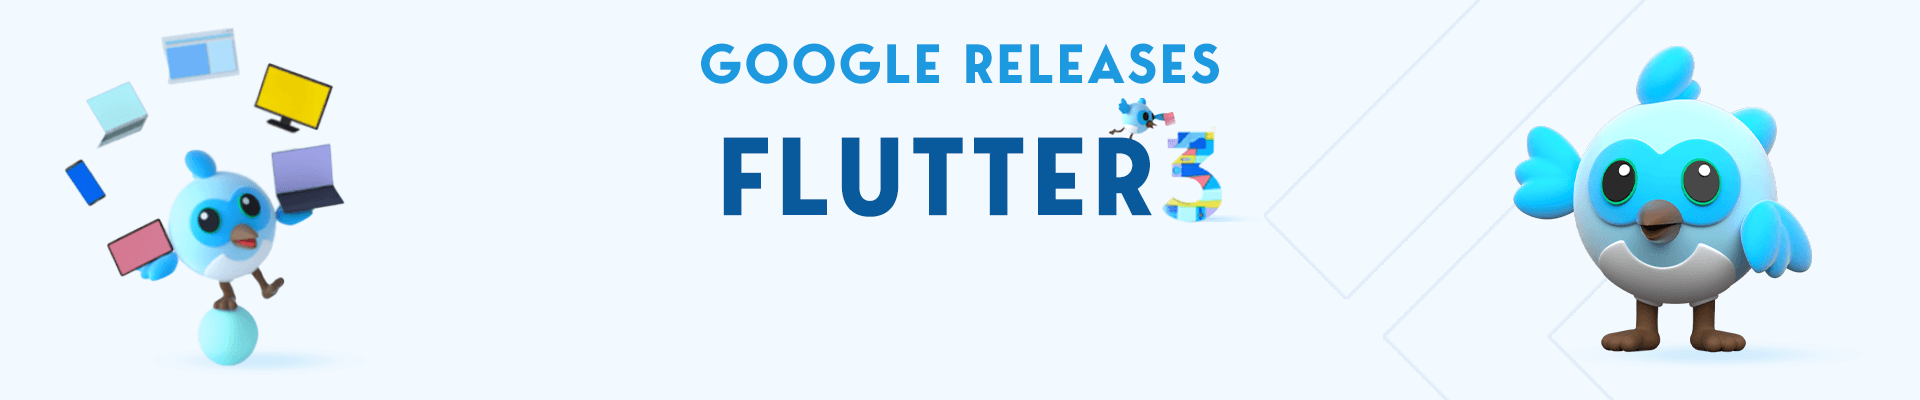 Google releases Flutter 3: Everything About Latest Features and Updates